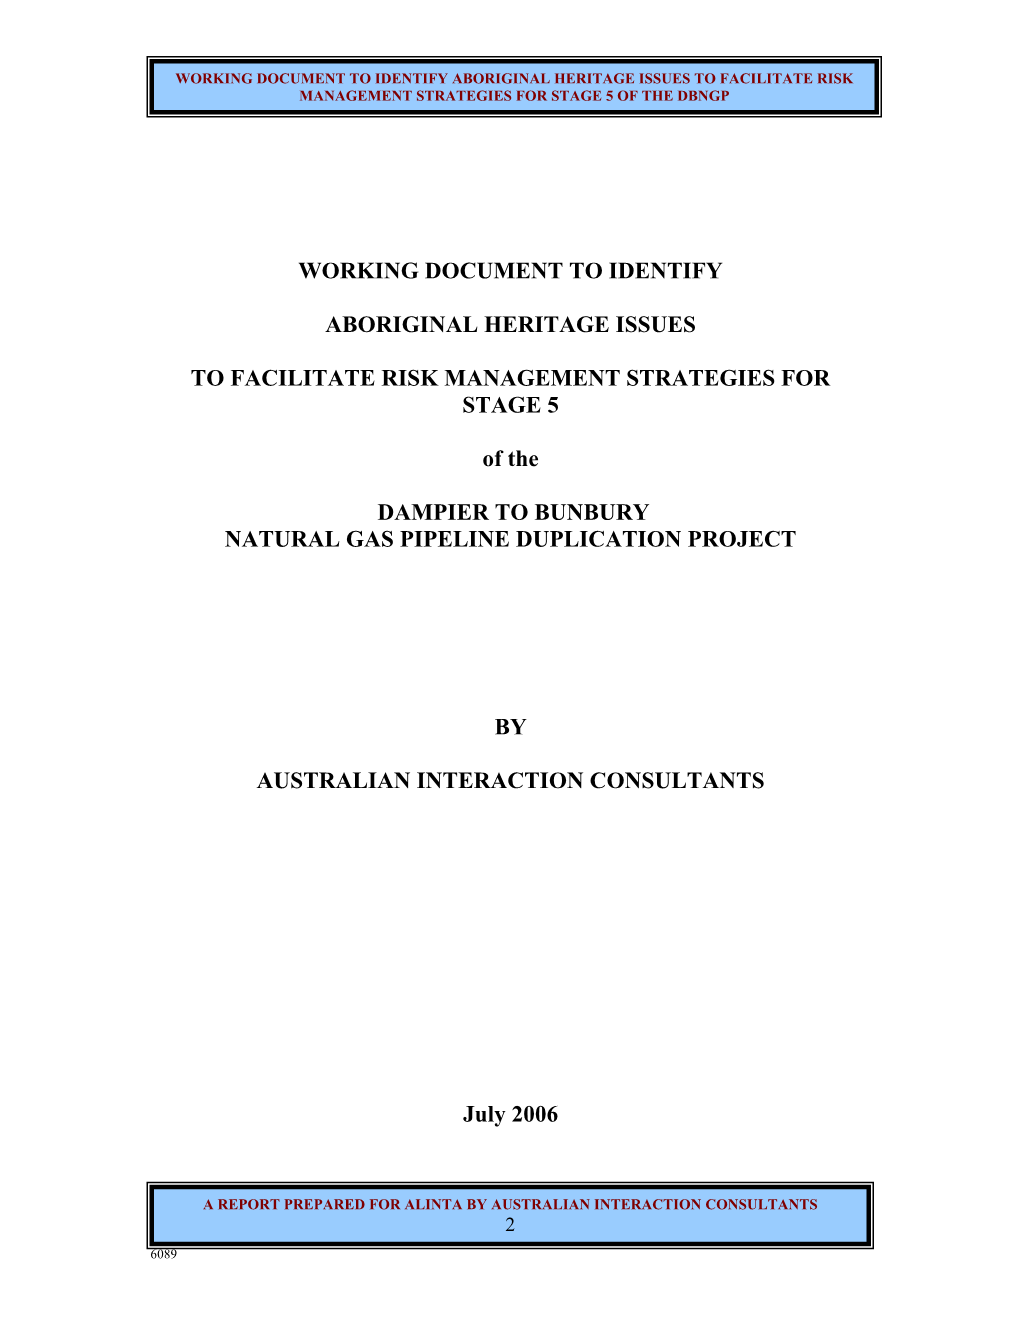 Working Document to Identify Aboriginal Heritage Issues to Facilitate Risk Management Strategies for Stage 5 of the Dbngp